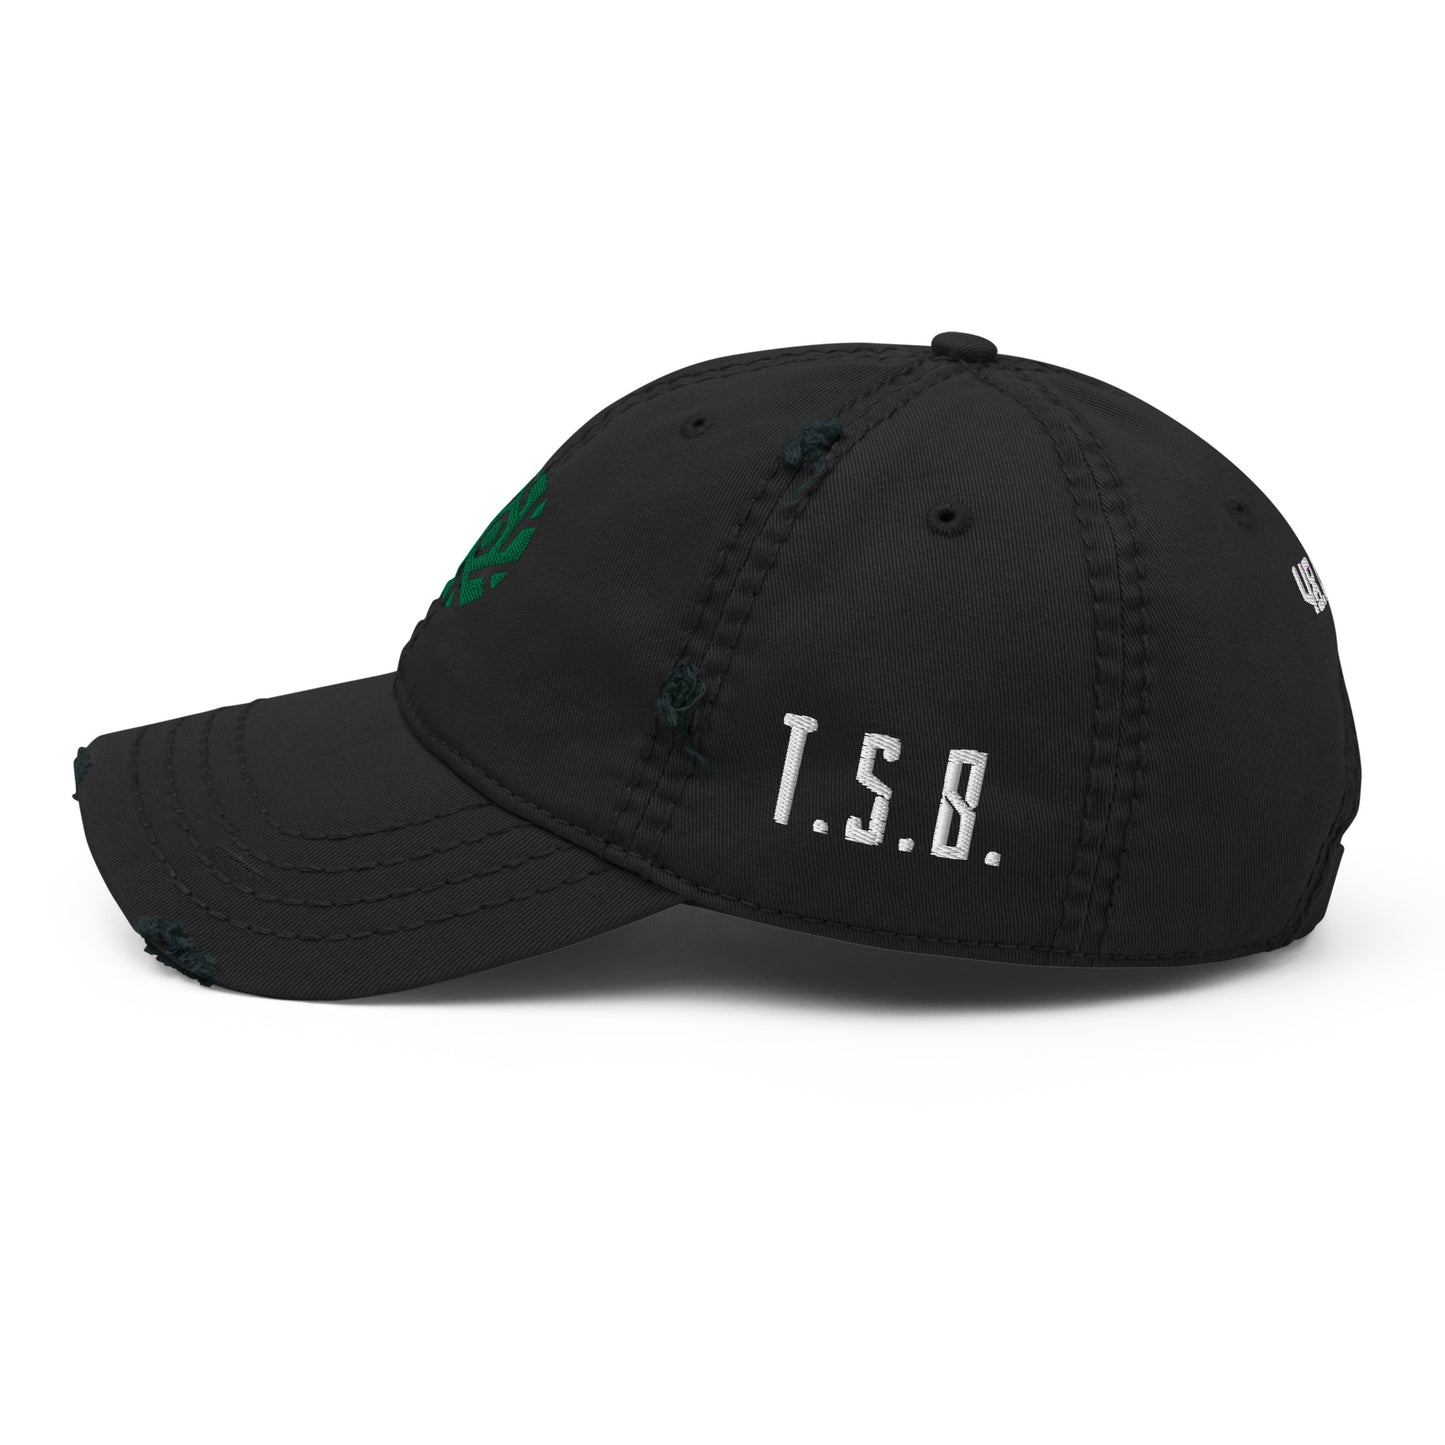 "Legacy of Snow" Cycle Distressed Dad Hat Gone Green